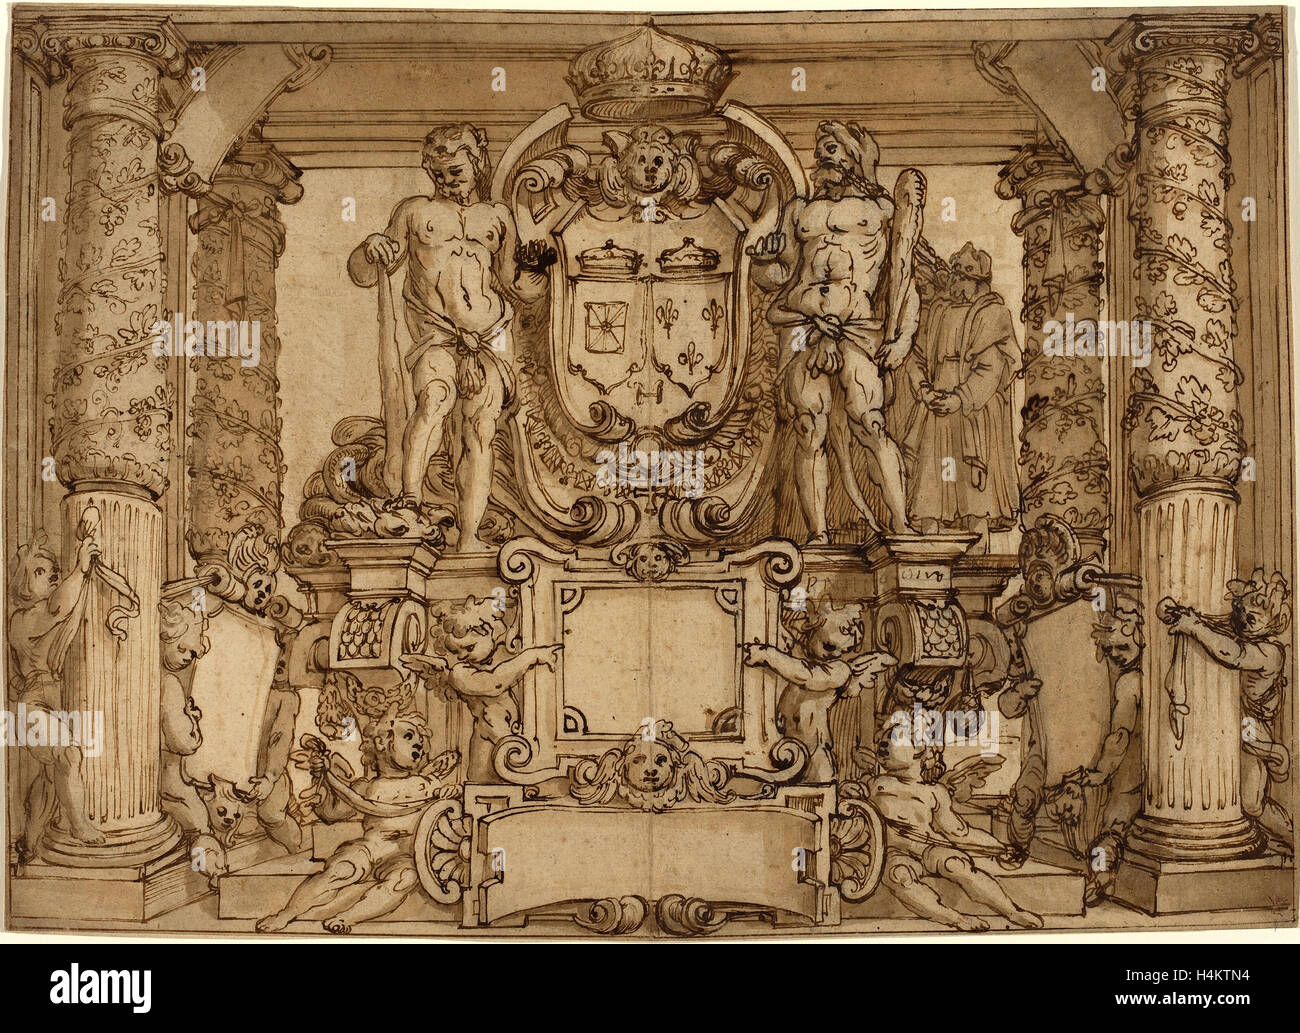 Antonio Tempesta or Agostino Ciampelli, Italian (1555-1630), An Architectural Wall Design in Honor of Henry IV Stock Photo